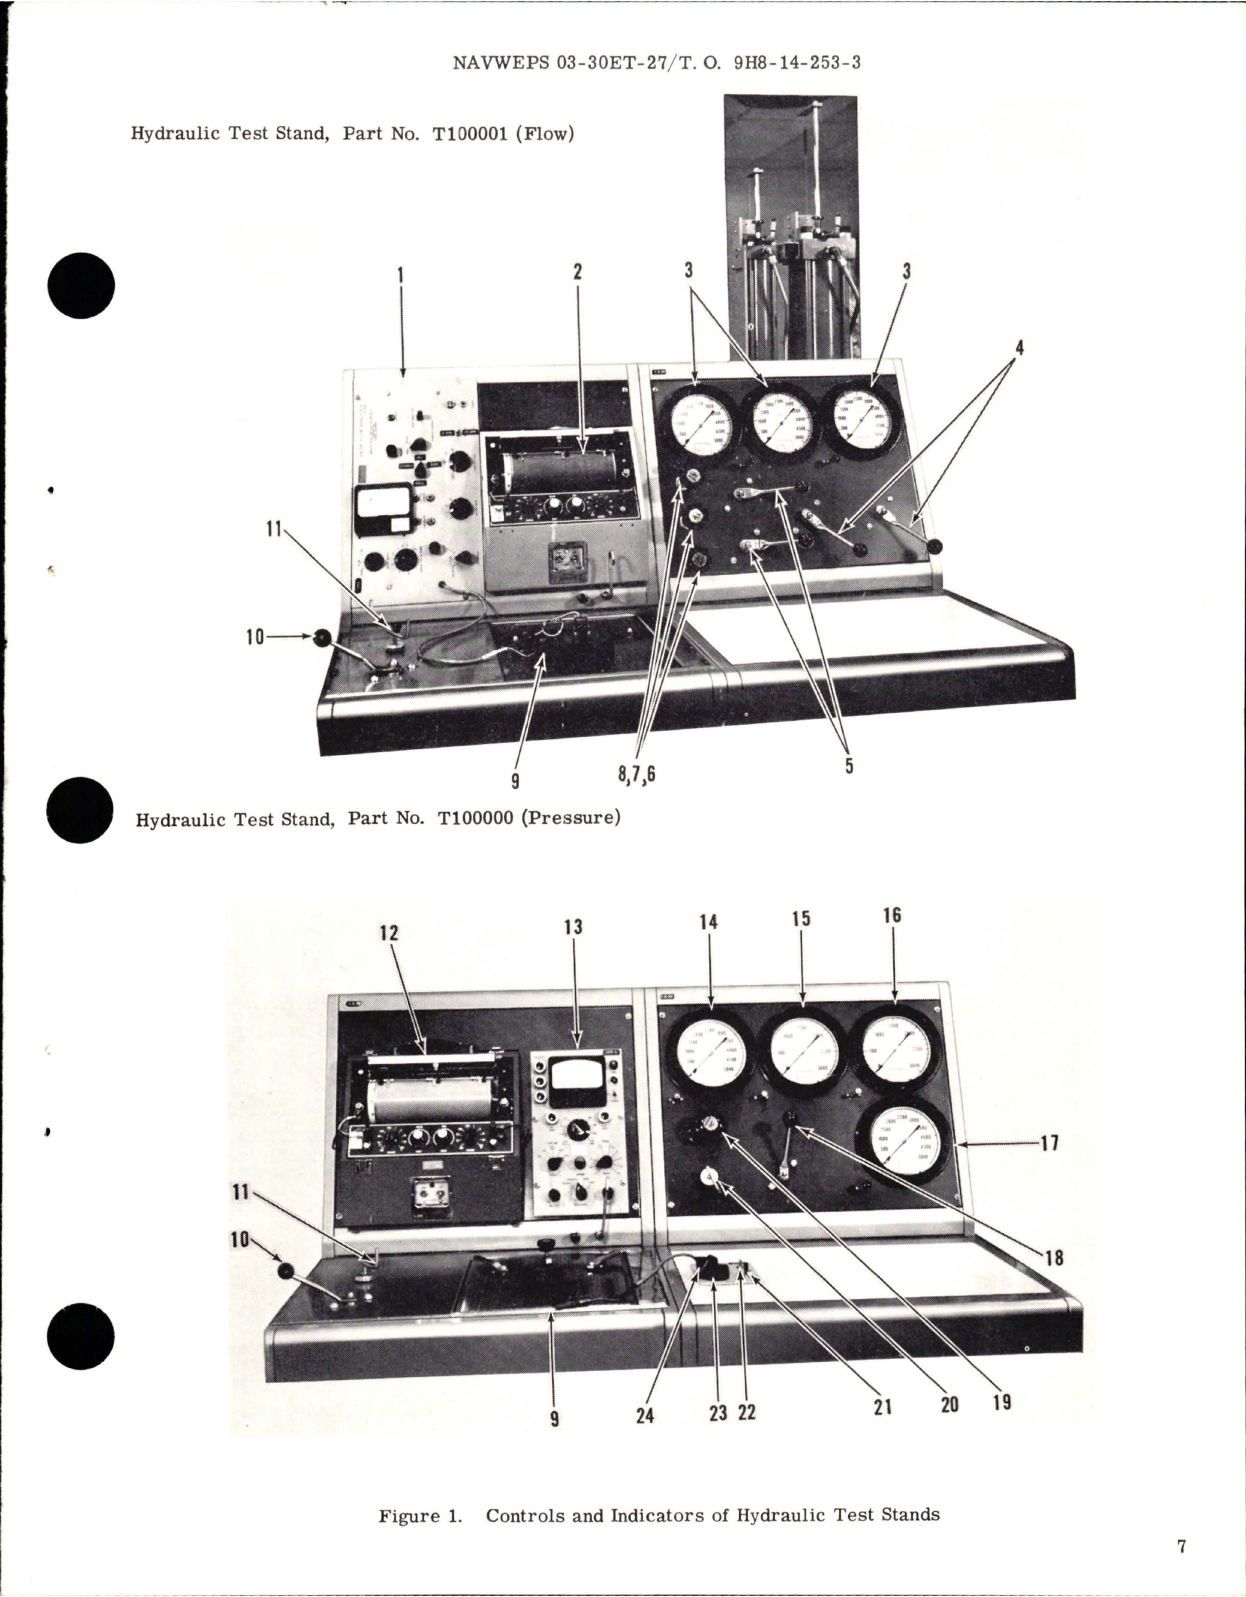 Sample page 9 from AirCorps Library document: Overhaul Instructions with Illustrated Parts for Four-Way Operated Dry Coil Servo Valve - Parts 205400 and 205400A